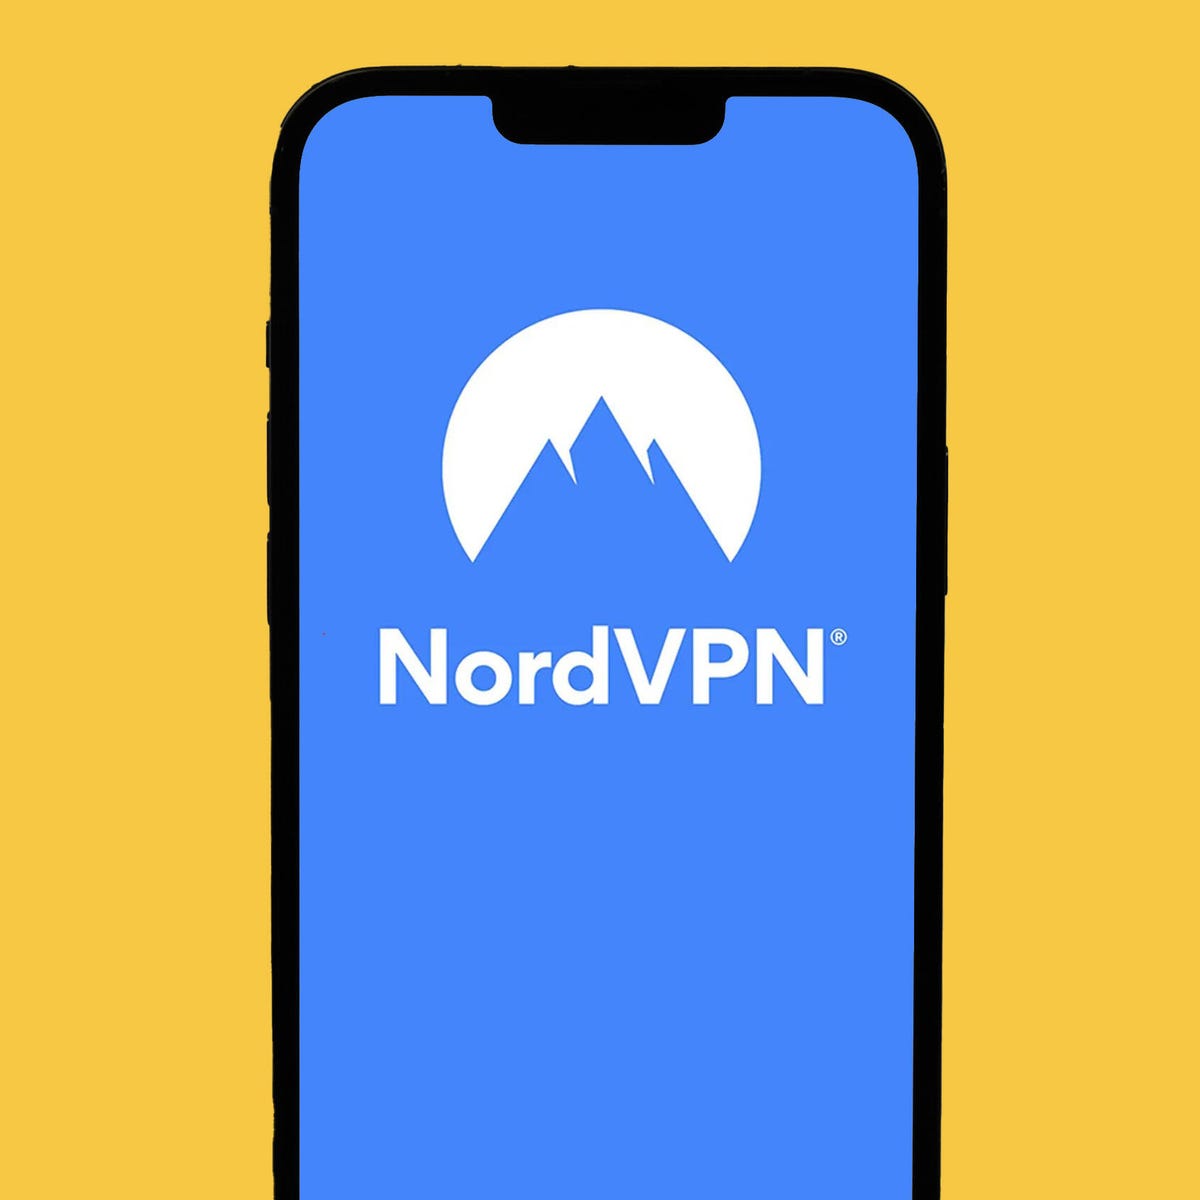 NordVPN Review: Feature-Rich and Speedy, but Privacy and